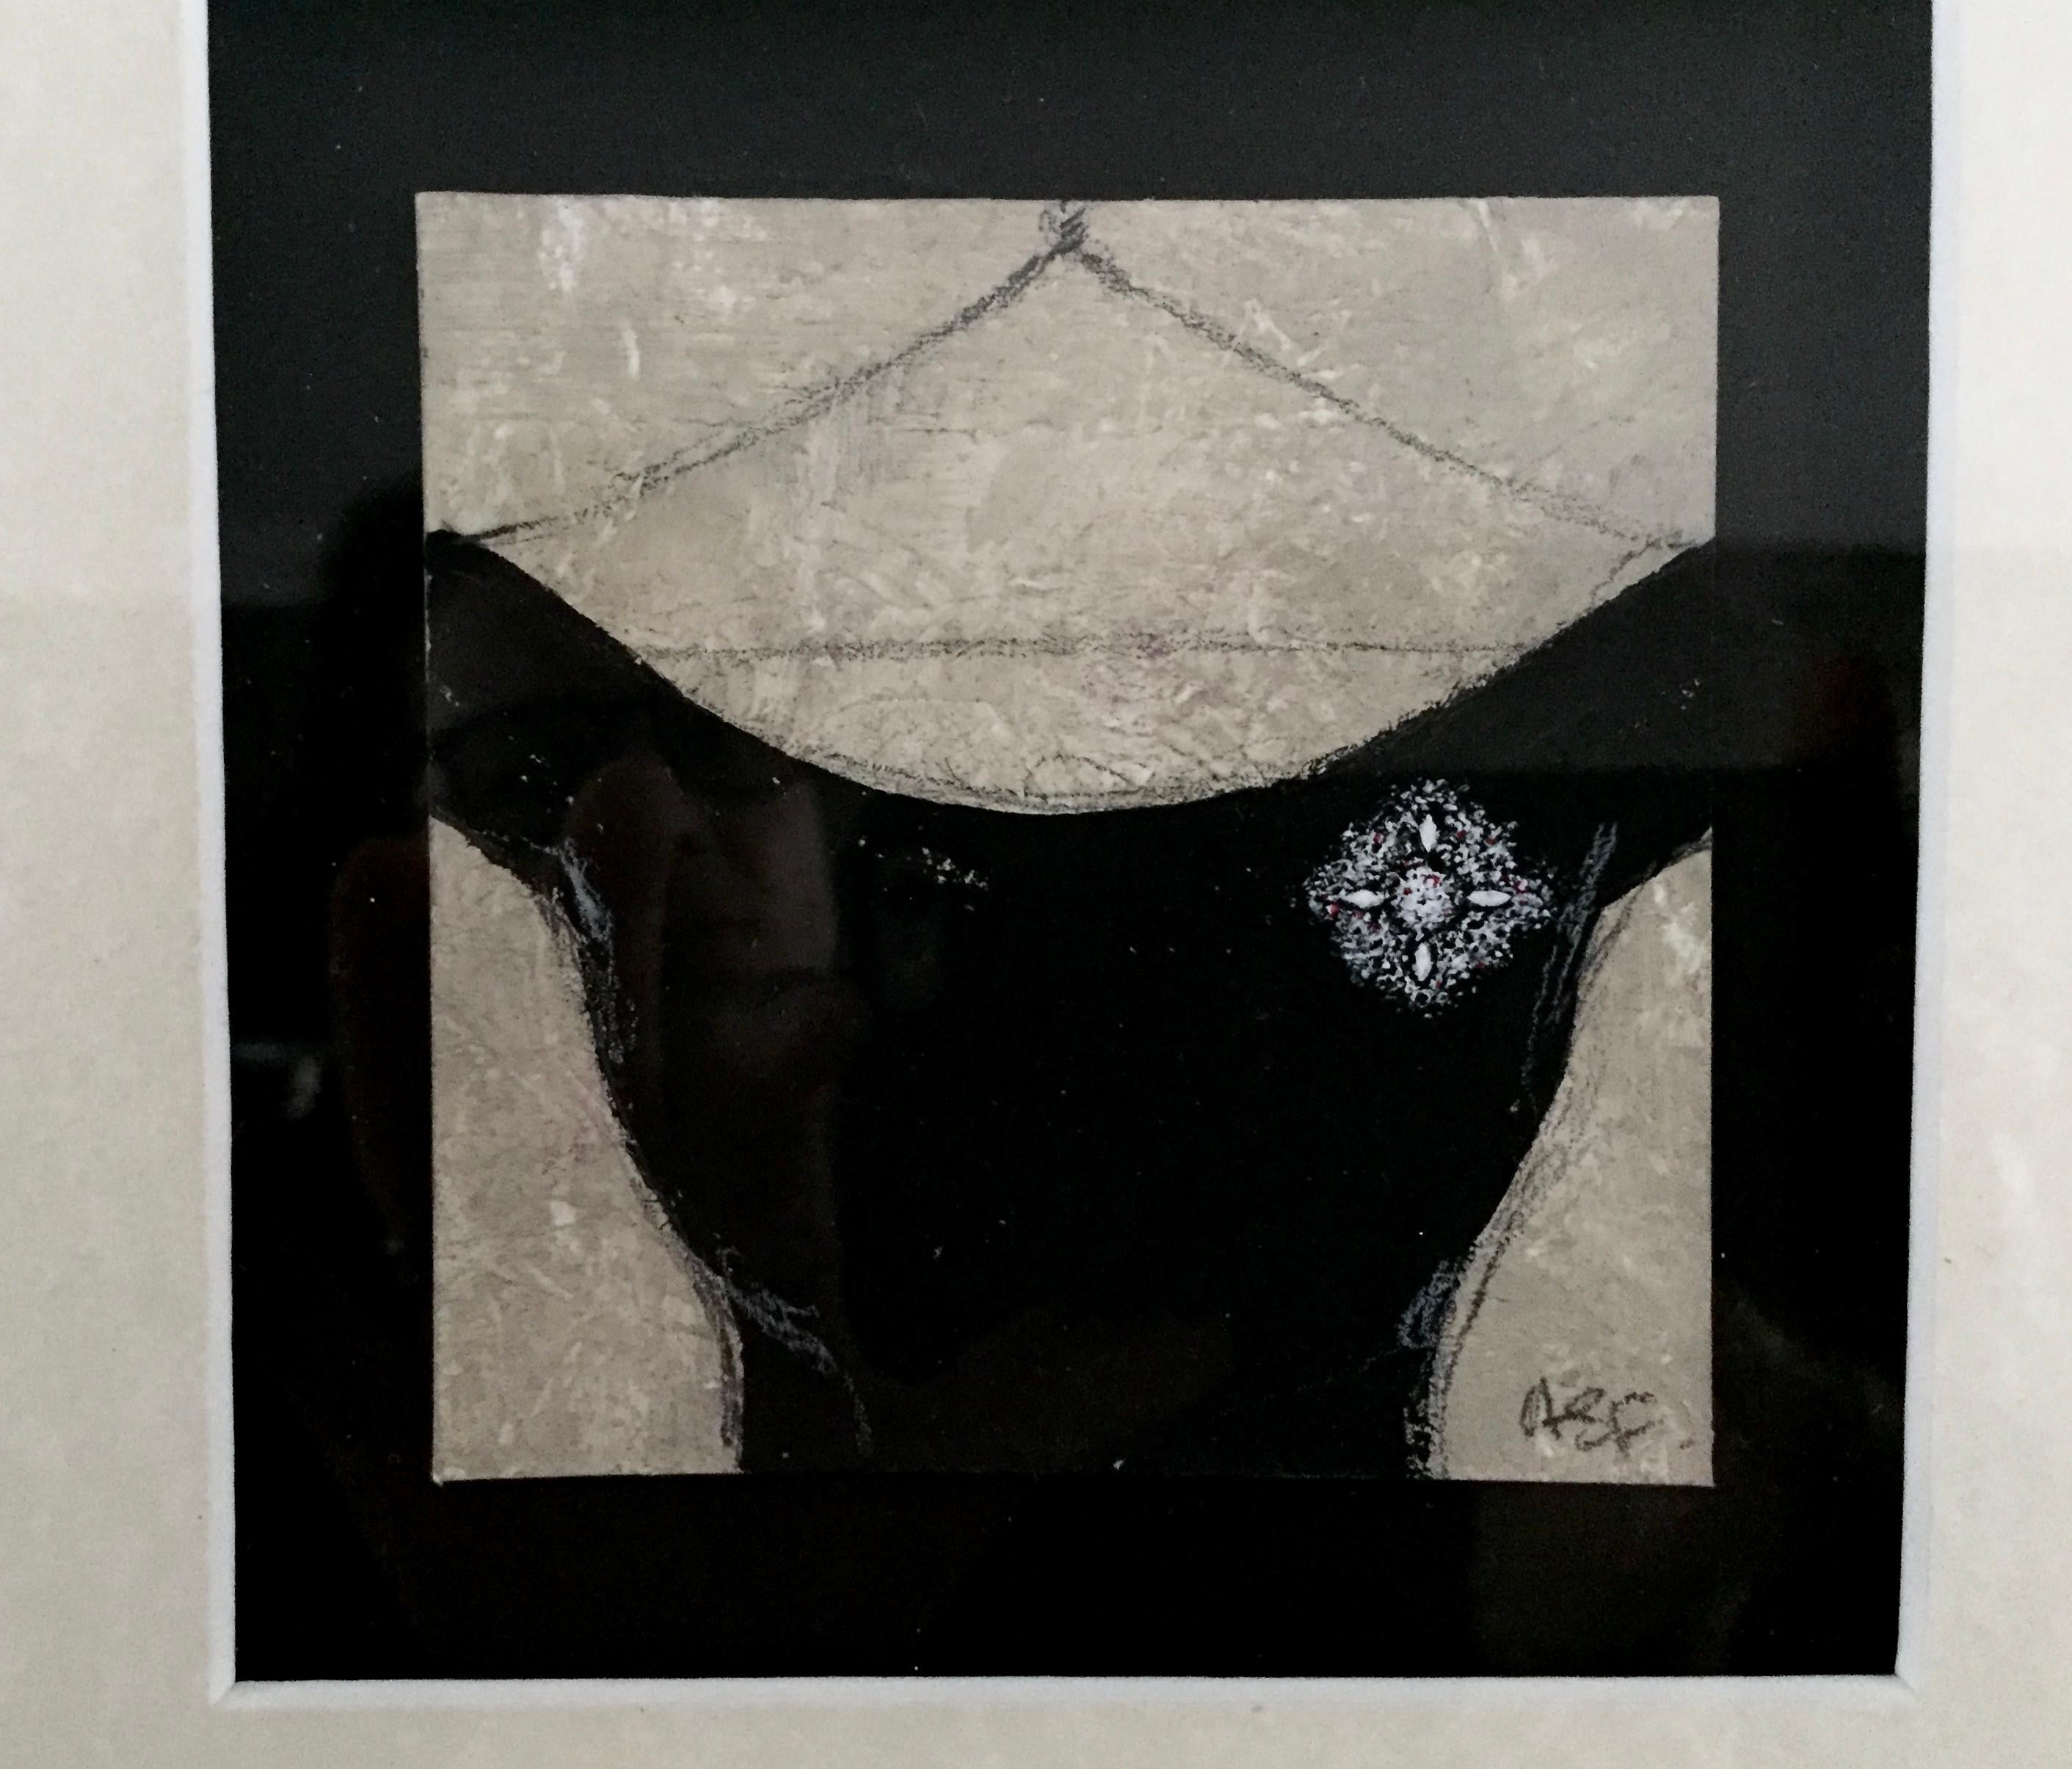 Evening Attire 1 - Black Dress With Delicate Broach, Black And White, Framed - Art by Andrea Stajan-Ferkul